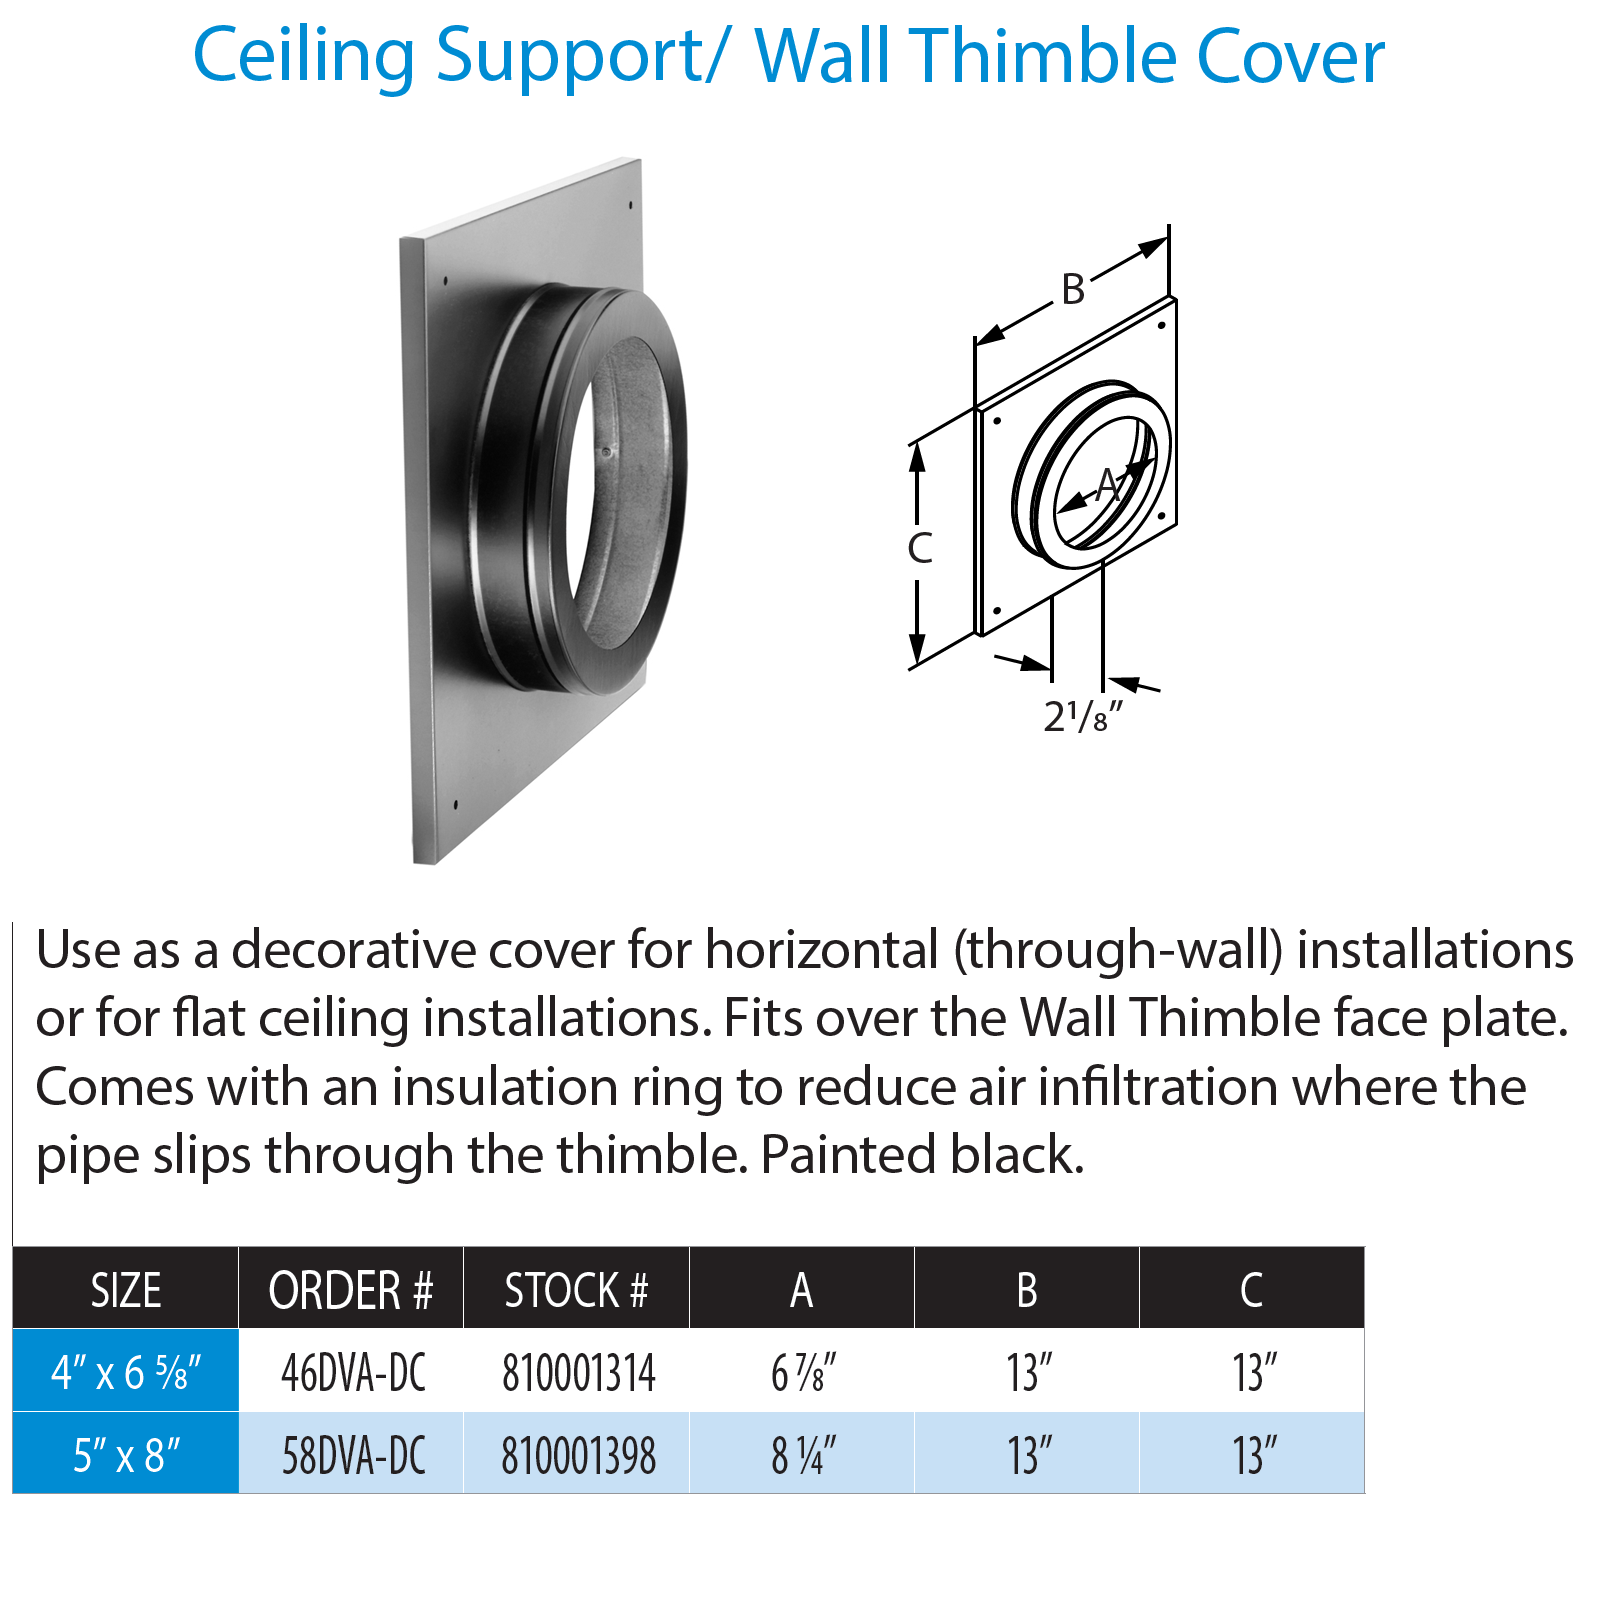 DuraVent DVP Round Ceiling Support / Wall Thimble | 46DVA-DC